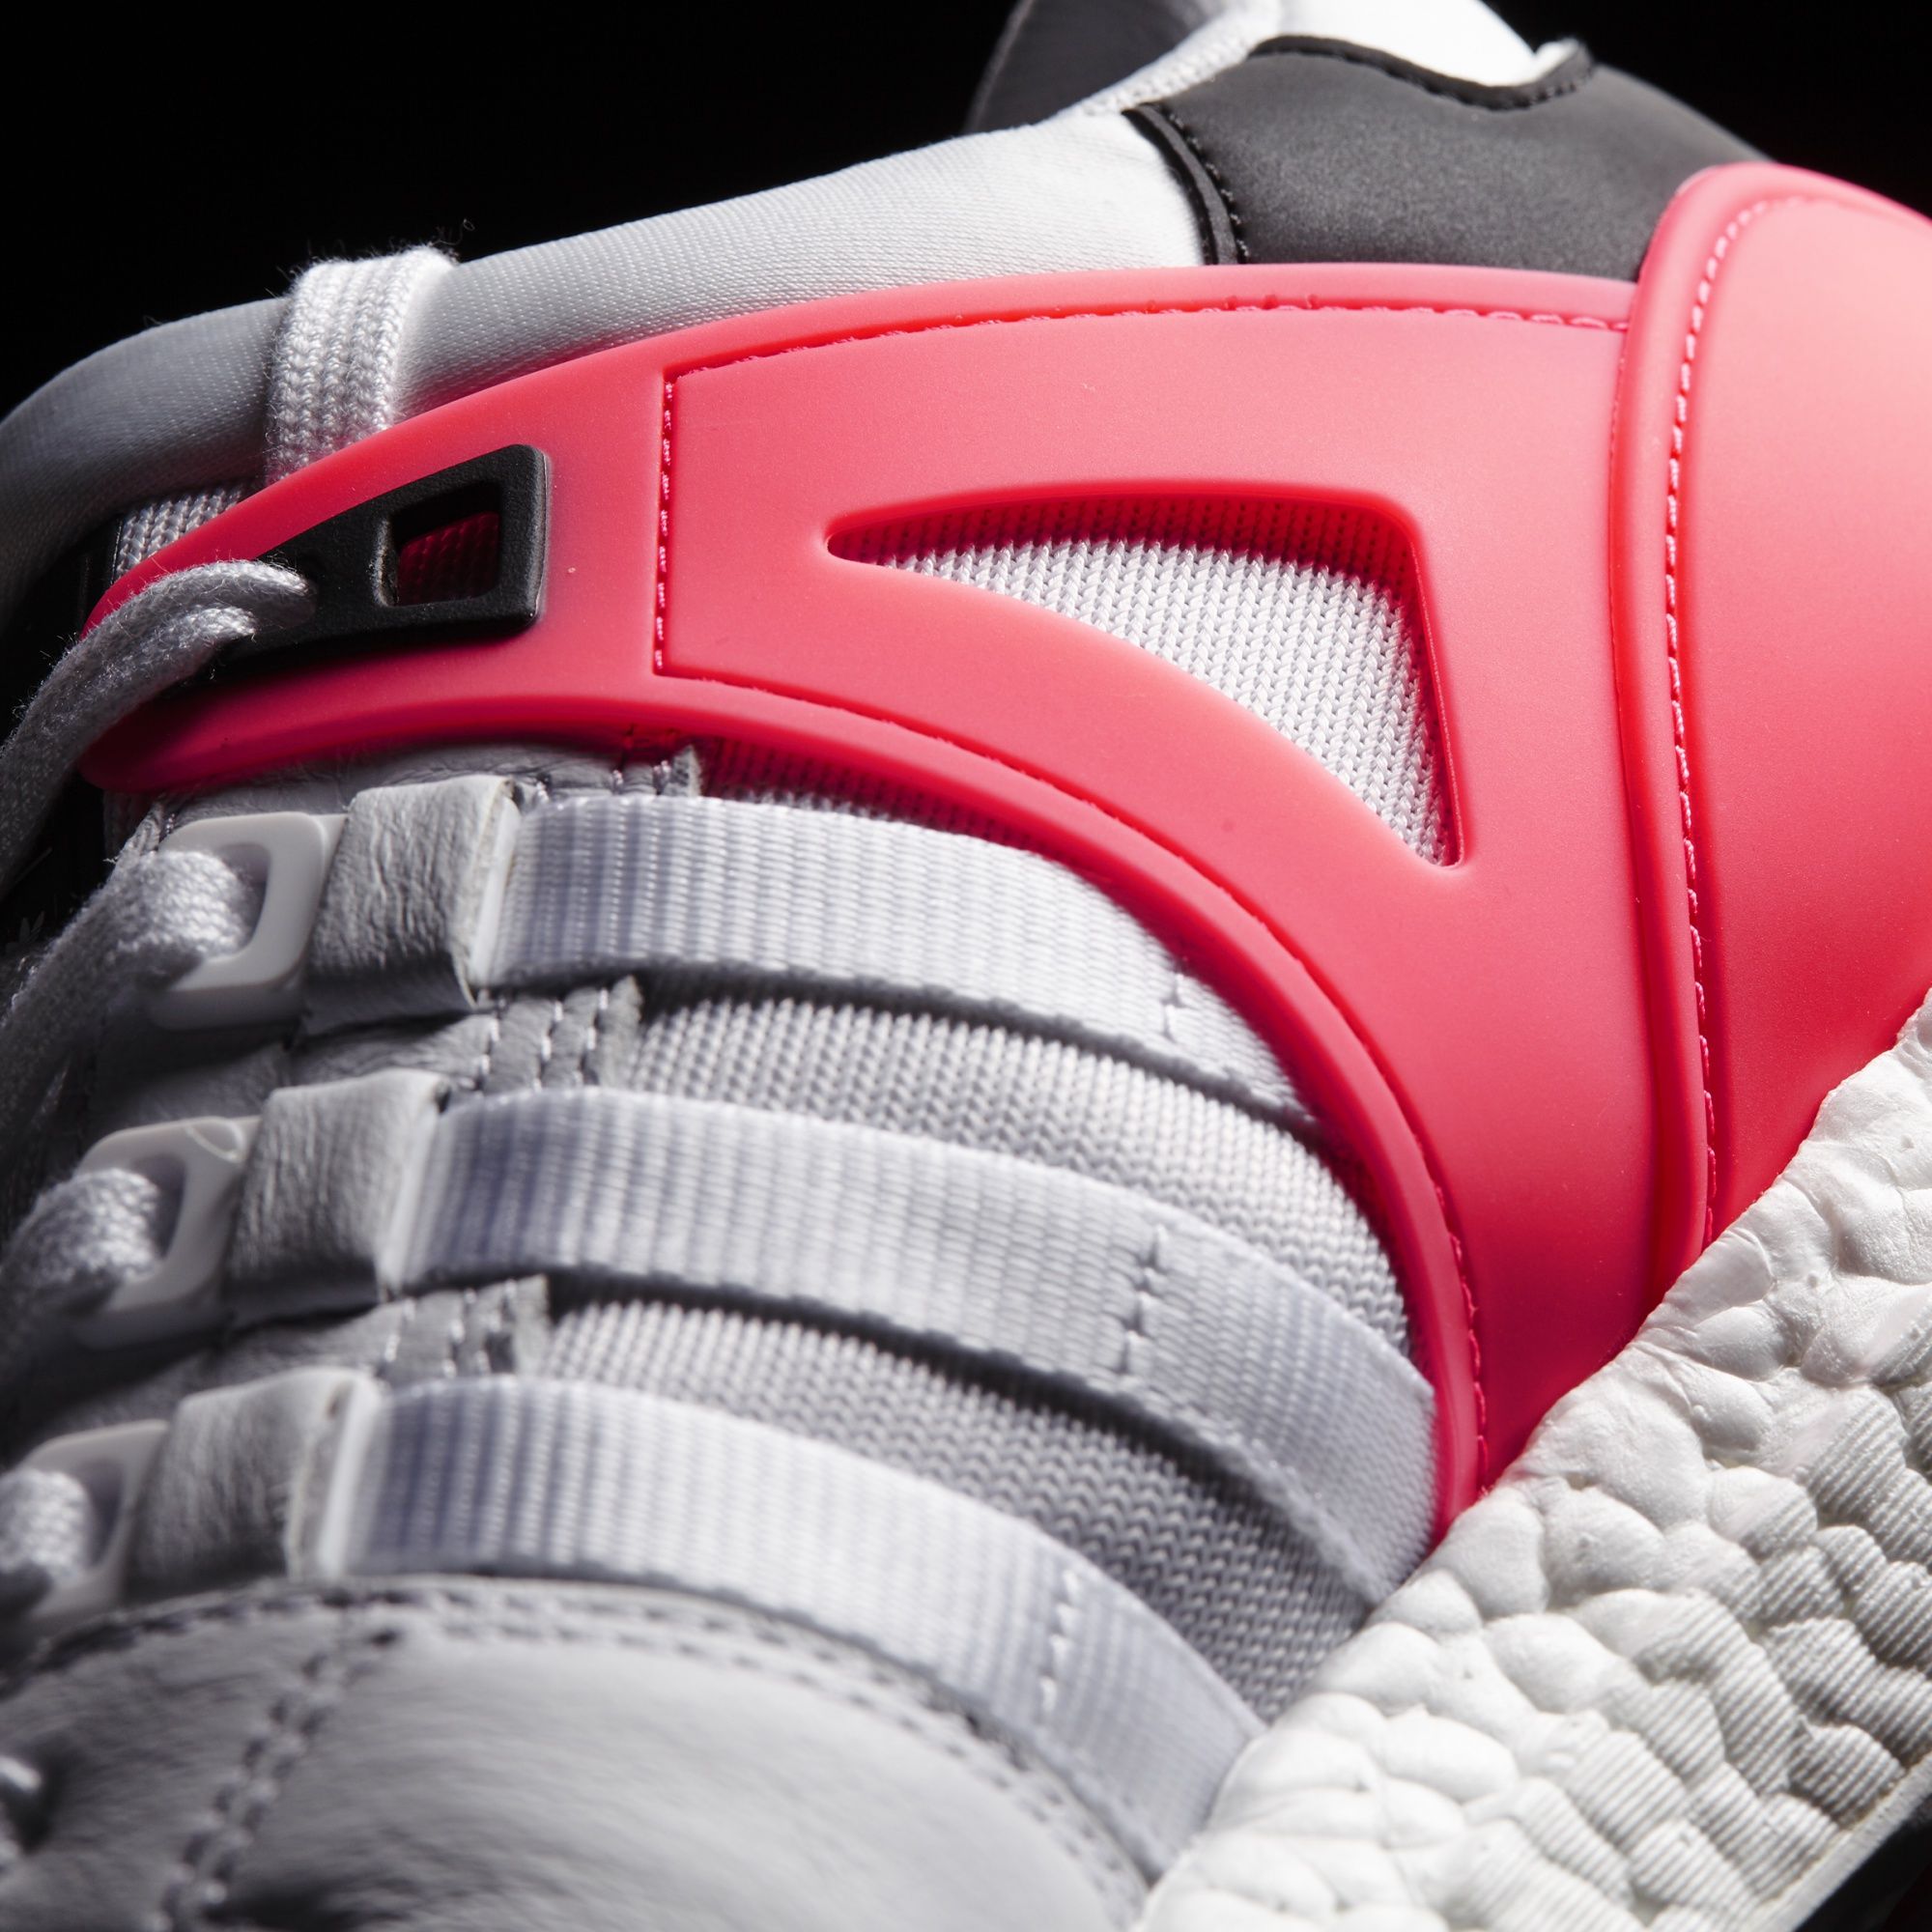 Adidas EQT Support Ultra
Footwear White / Turbo